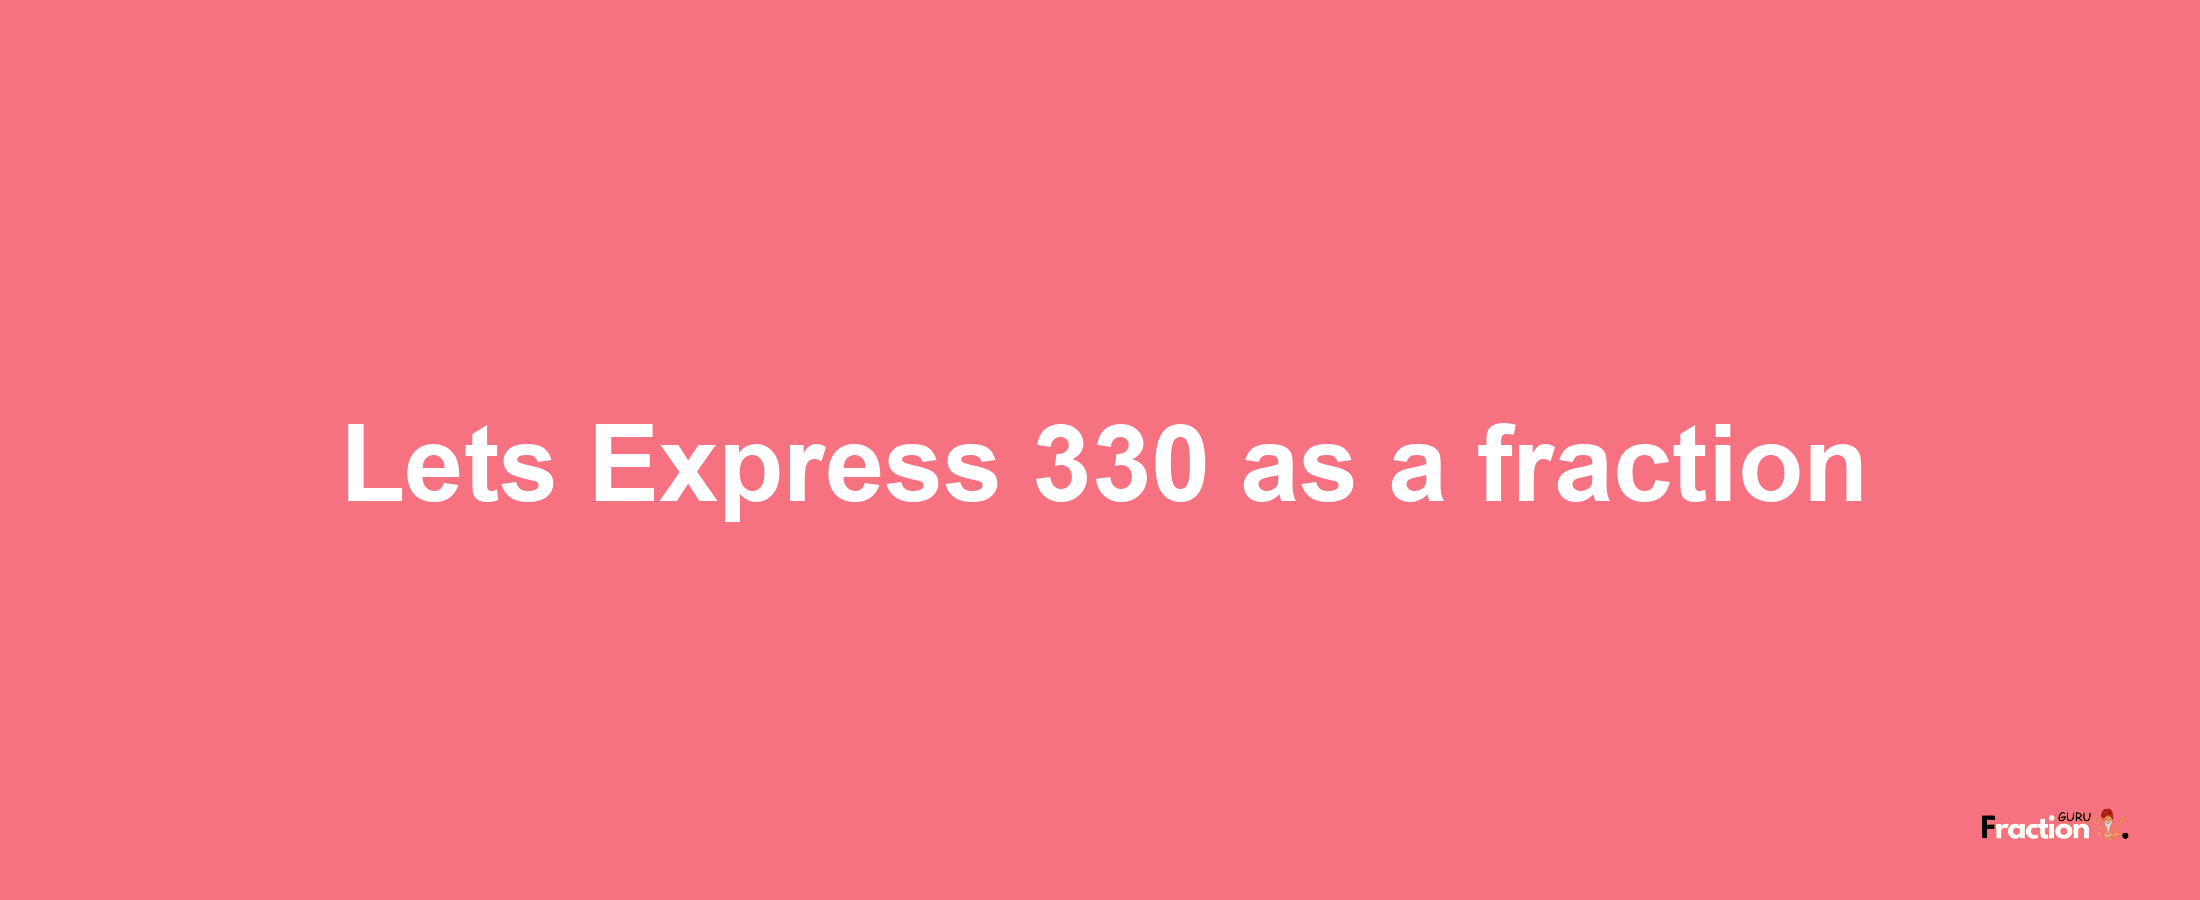 Lets Express 330 as afraction